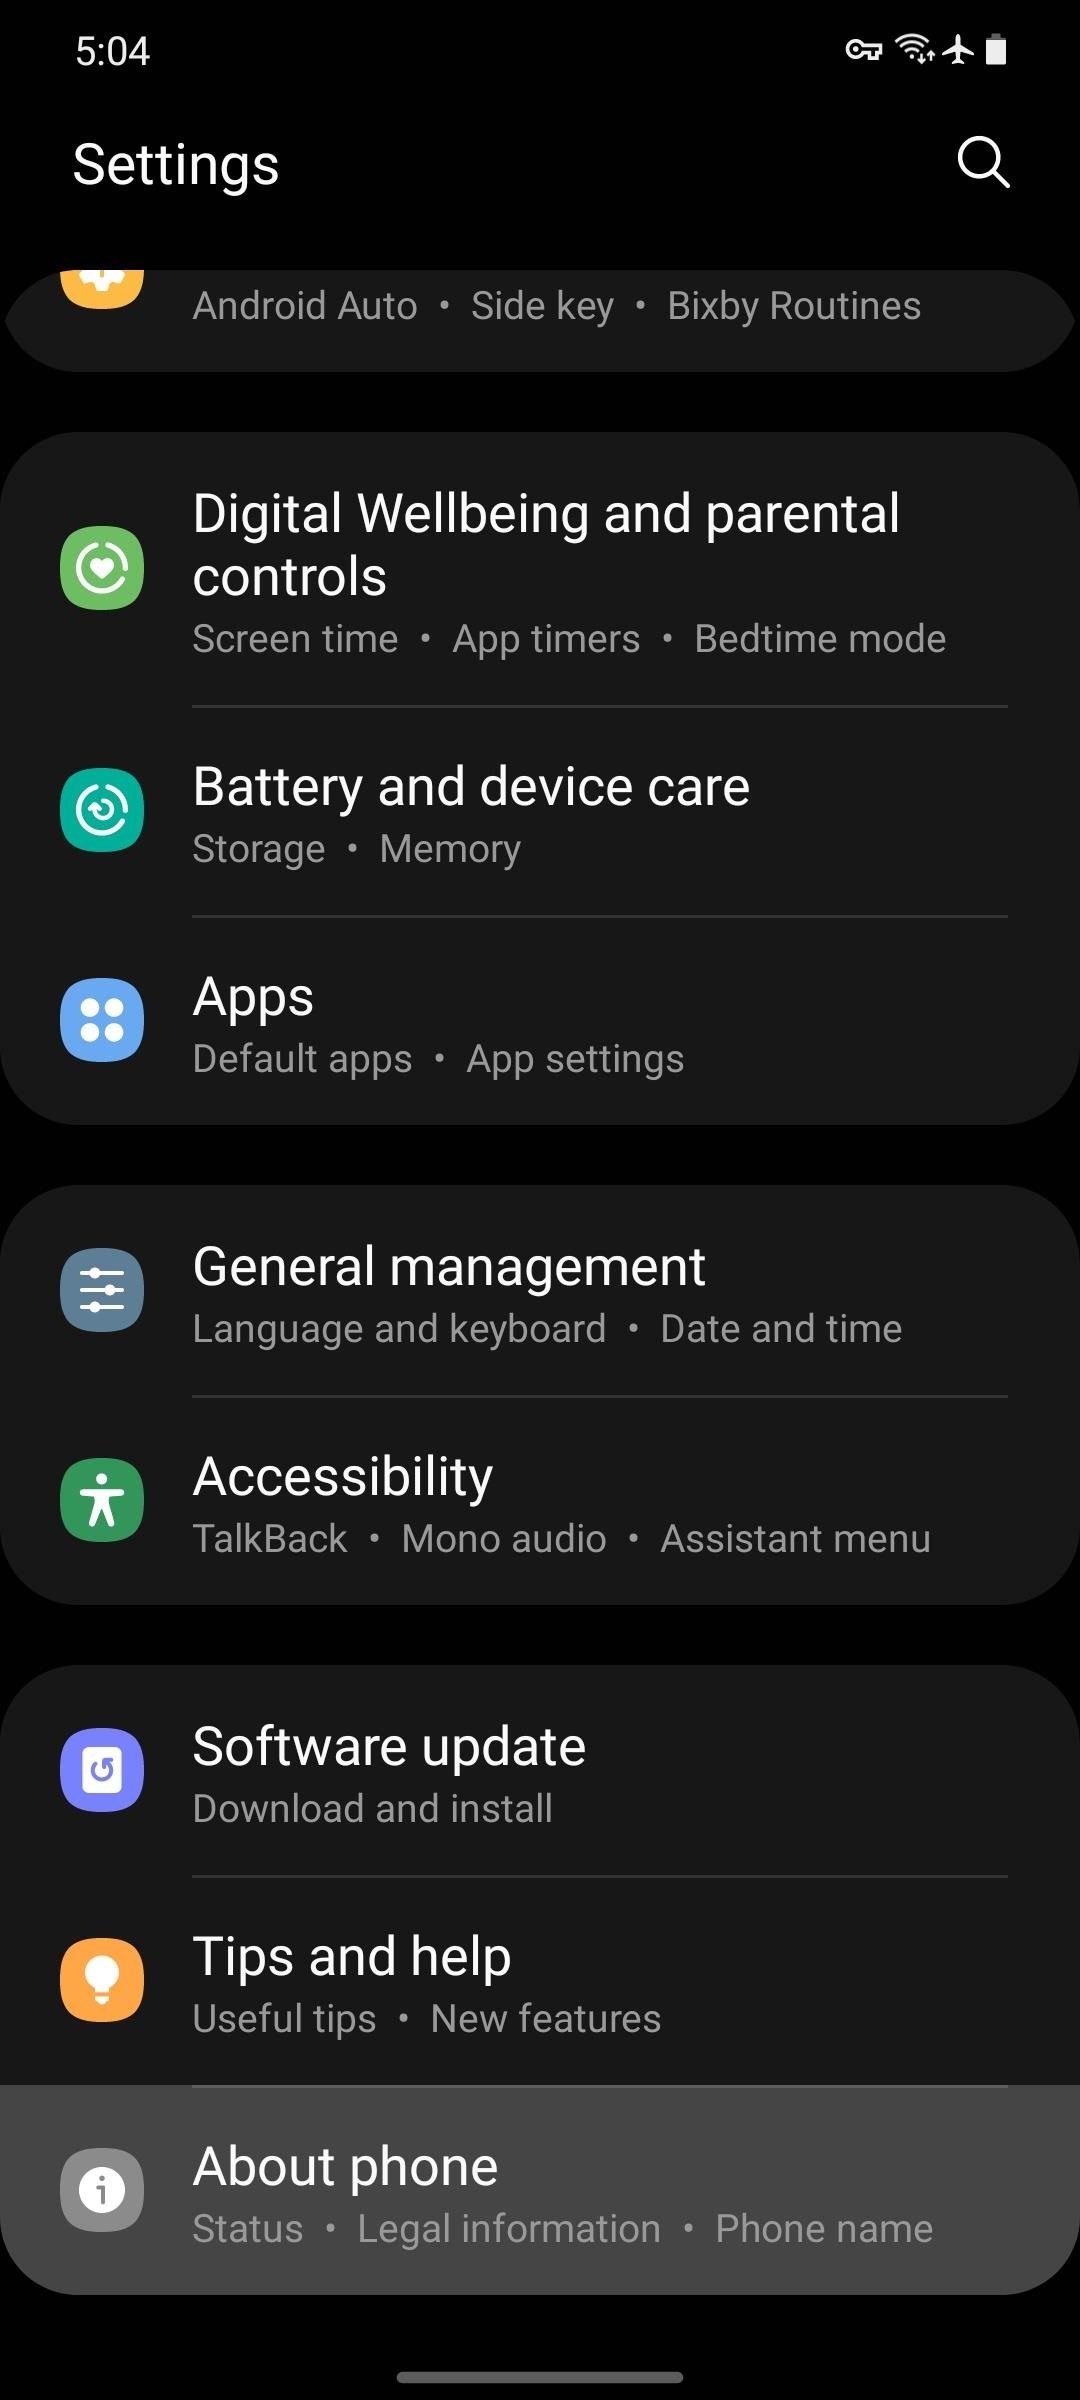 How to Use Wireless ADB in Samsung's One UI 3.0 (It's Actually Pretty Easy)